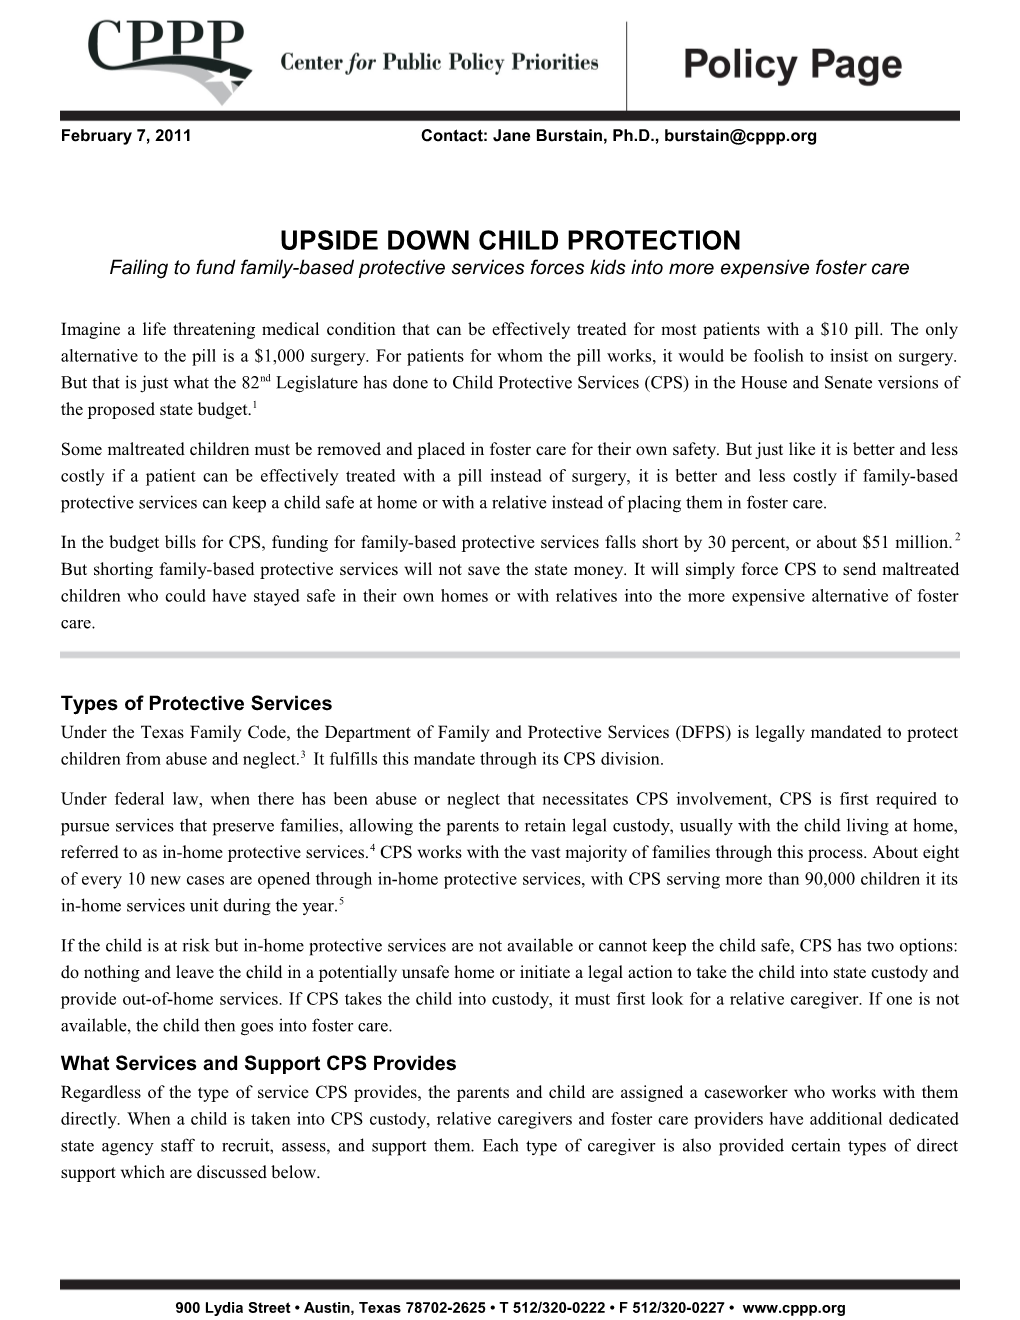 Upside Down Child Protection Failing to Fund Family-Based Protective Services Forces Kids